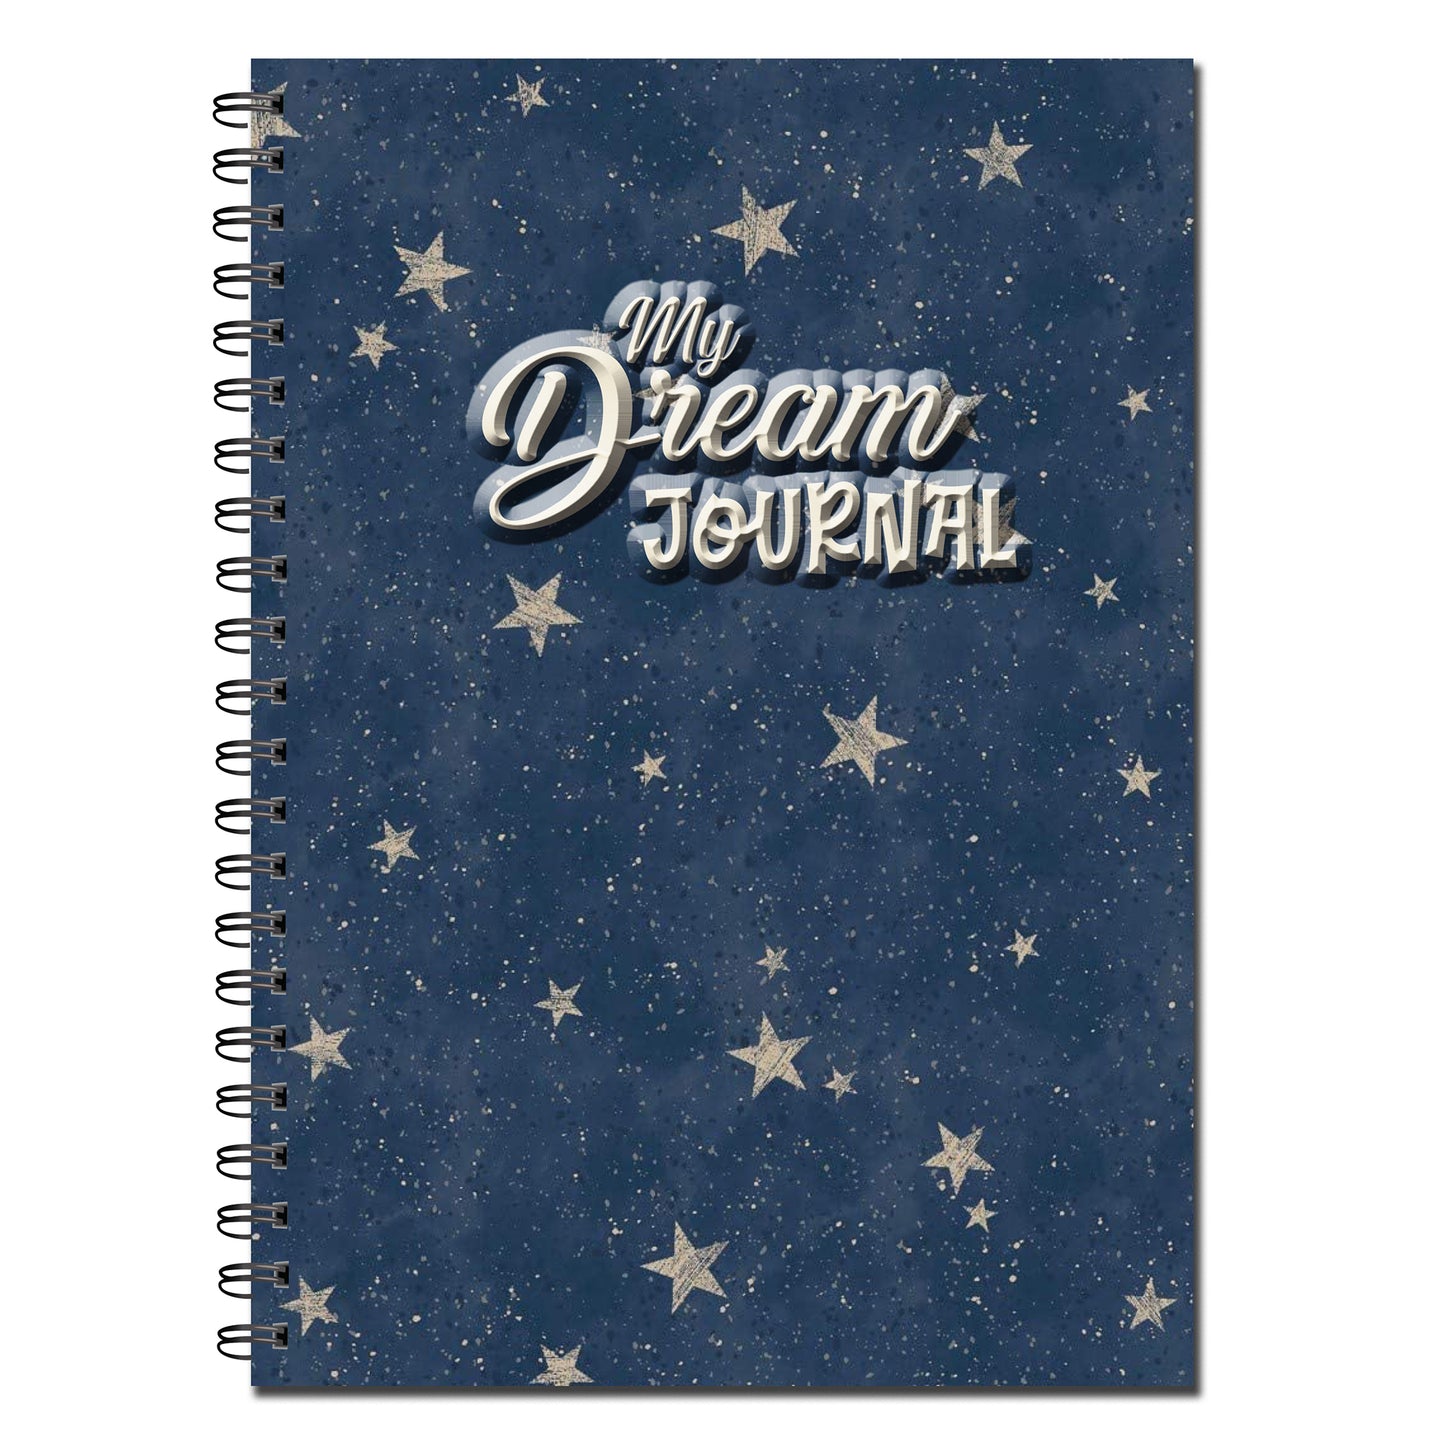 My Dream Journal | Sleep Diary | A5 wirobound book | 50 pages printed to both sides on quality 120gsm